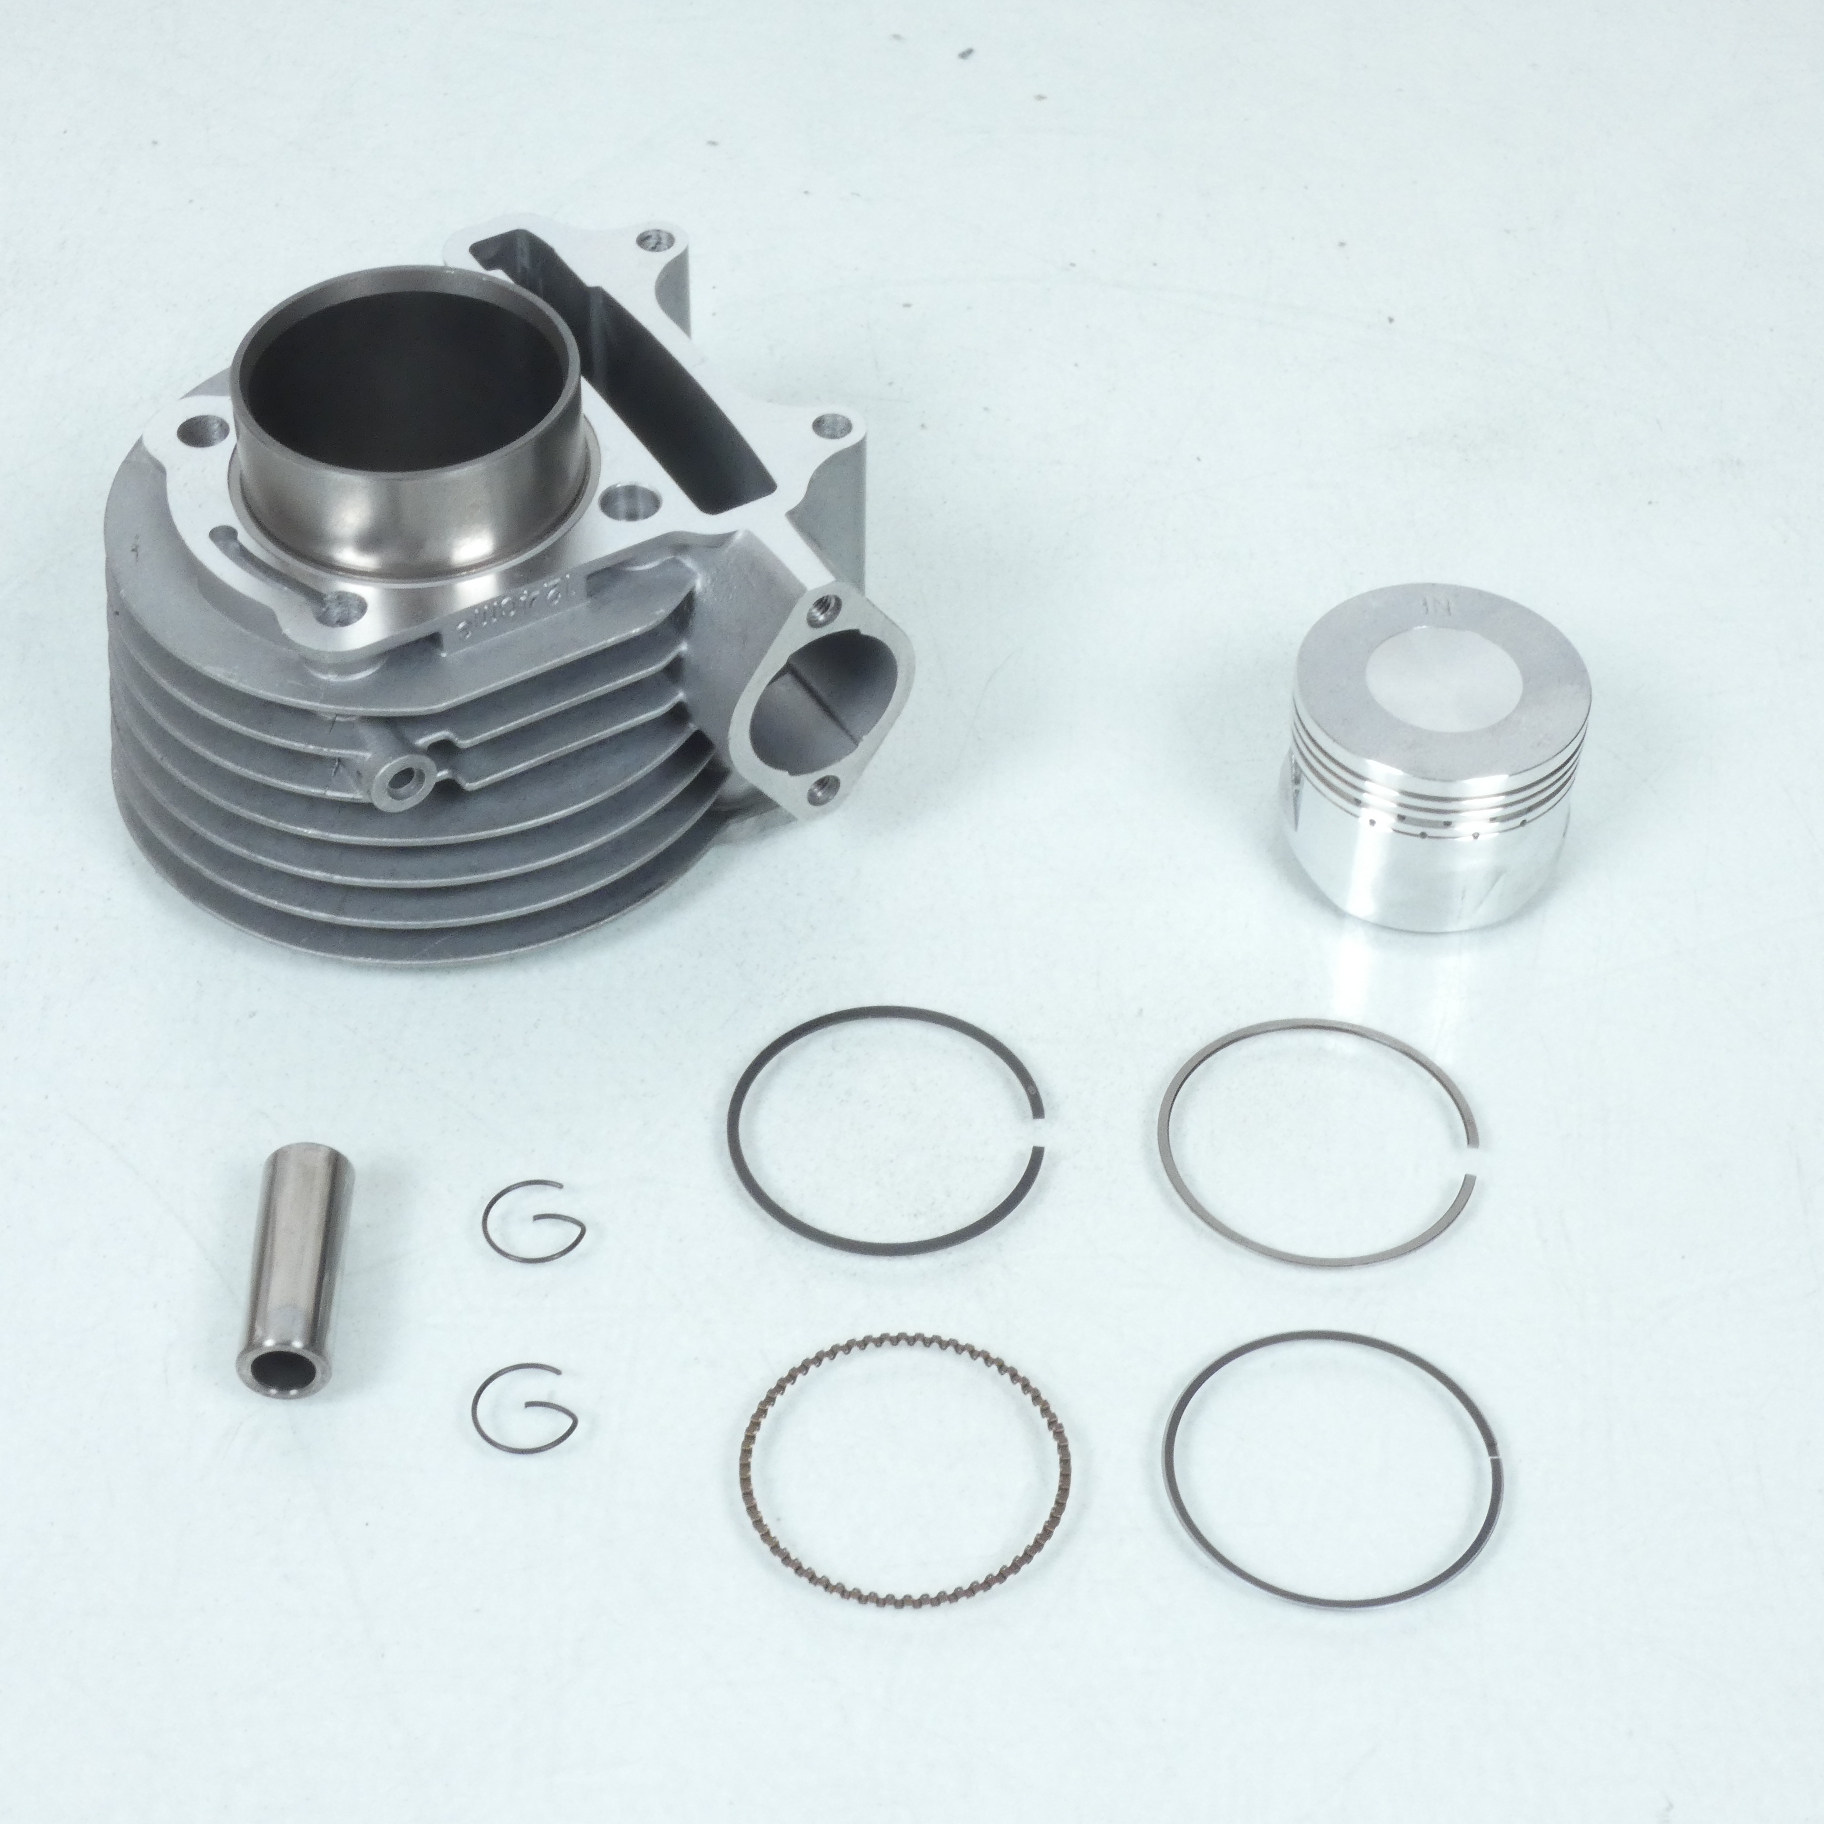 Kit Cylindre piston Ø51.8mm Sifam pour scooter Baotian Bt T-7 125 GY6 Axe Ø15mm